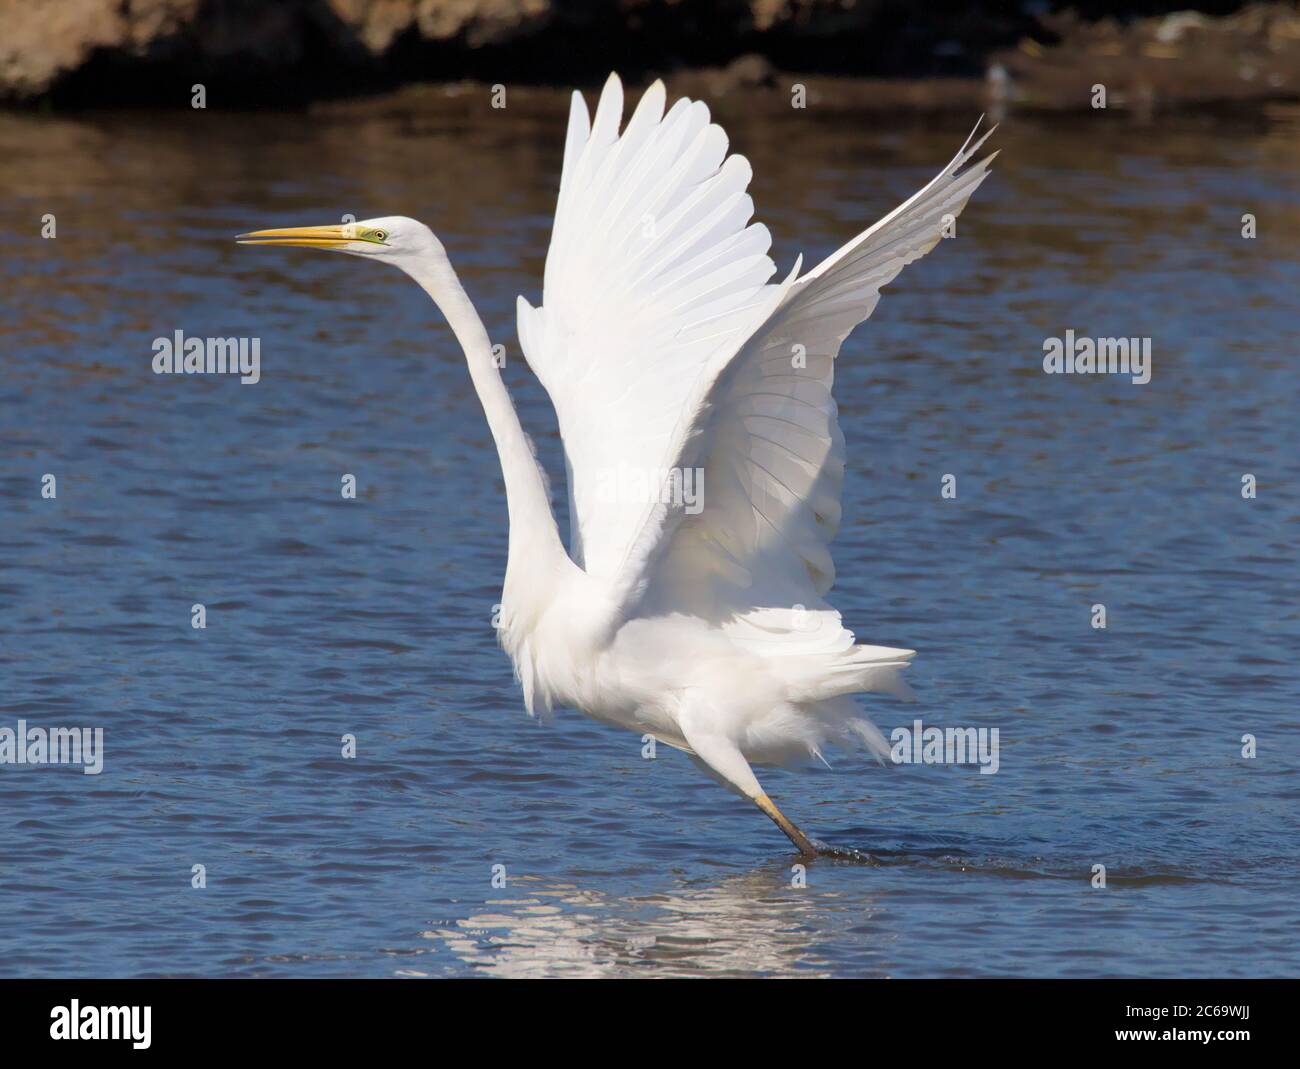 Great White Egret, Ardea Alba, Taking Off With Wings Outstretched From the Water On A Marsh. Taken at Lodmoor UK Stock Photo